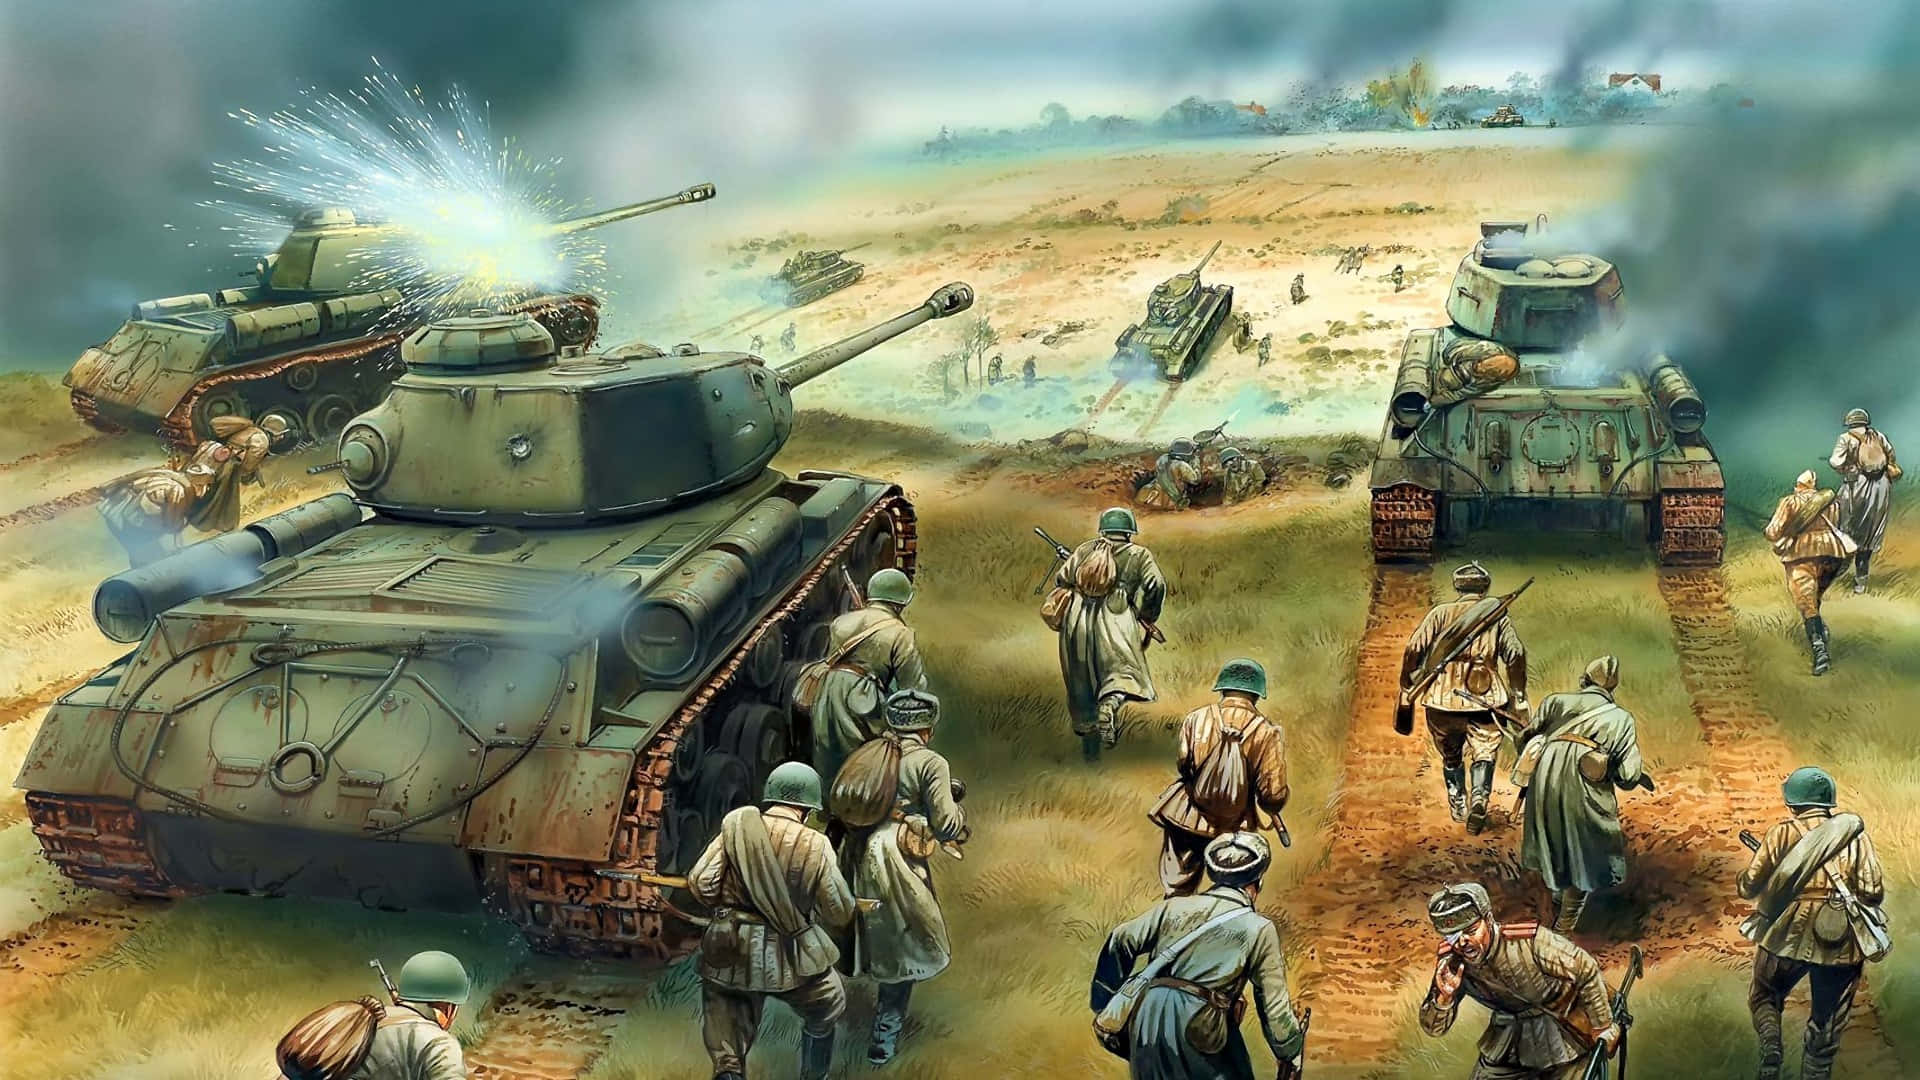 A Painting Of Soldiers And Tanks In The Field